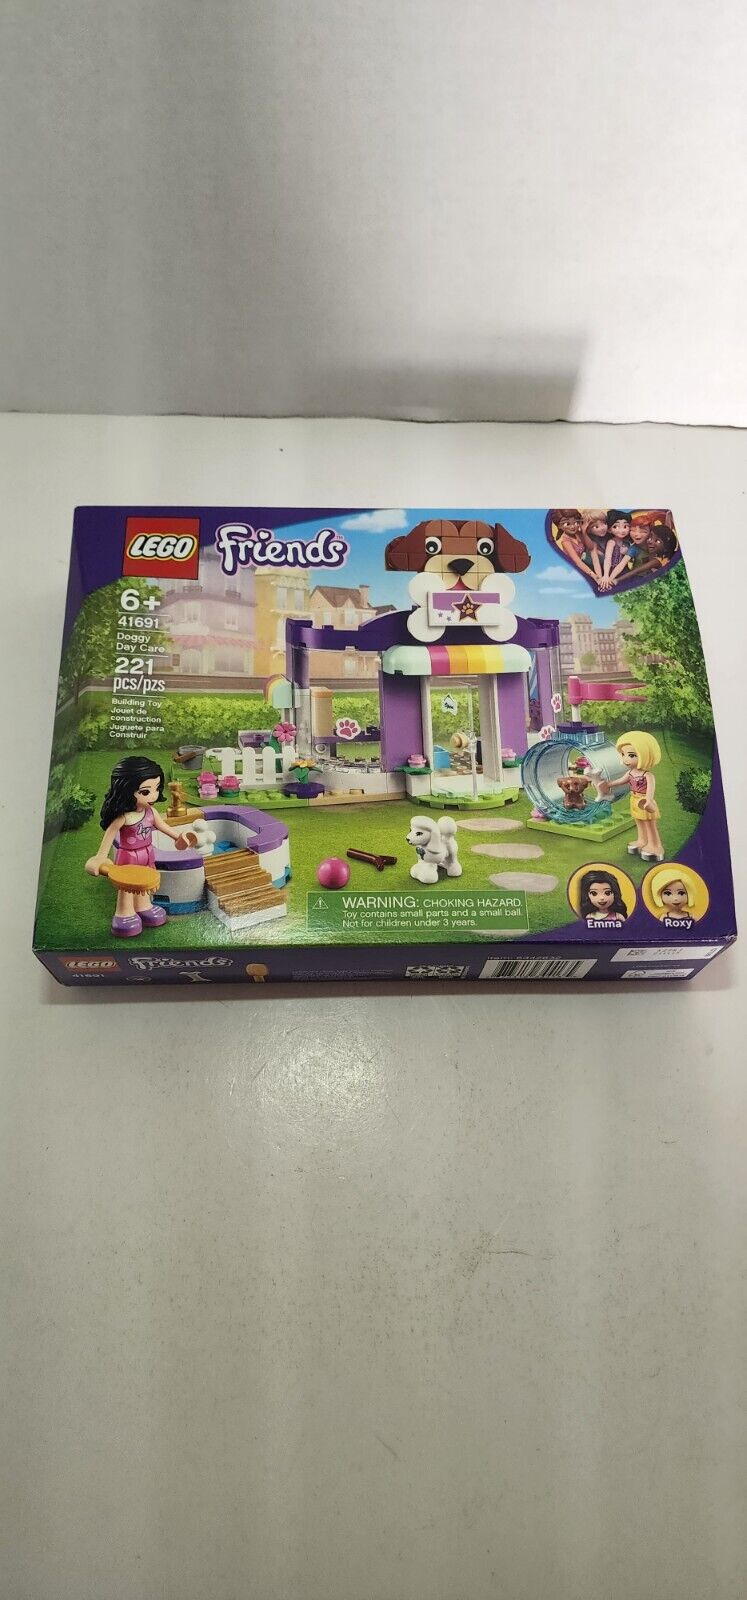 Lego Friends 41691 Doggy Day Care  New and Factory Sealed Please Read 